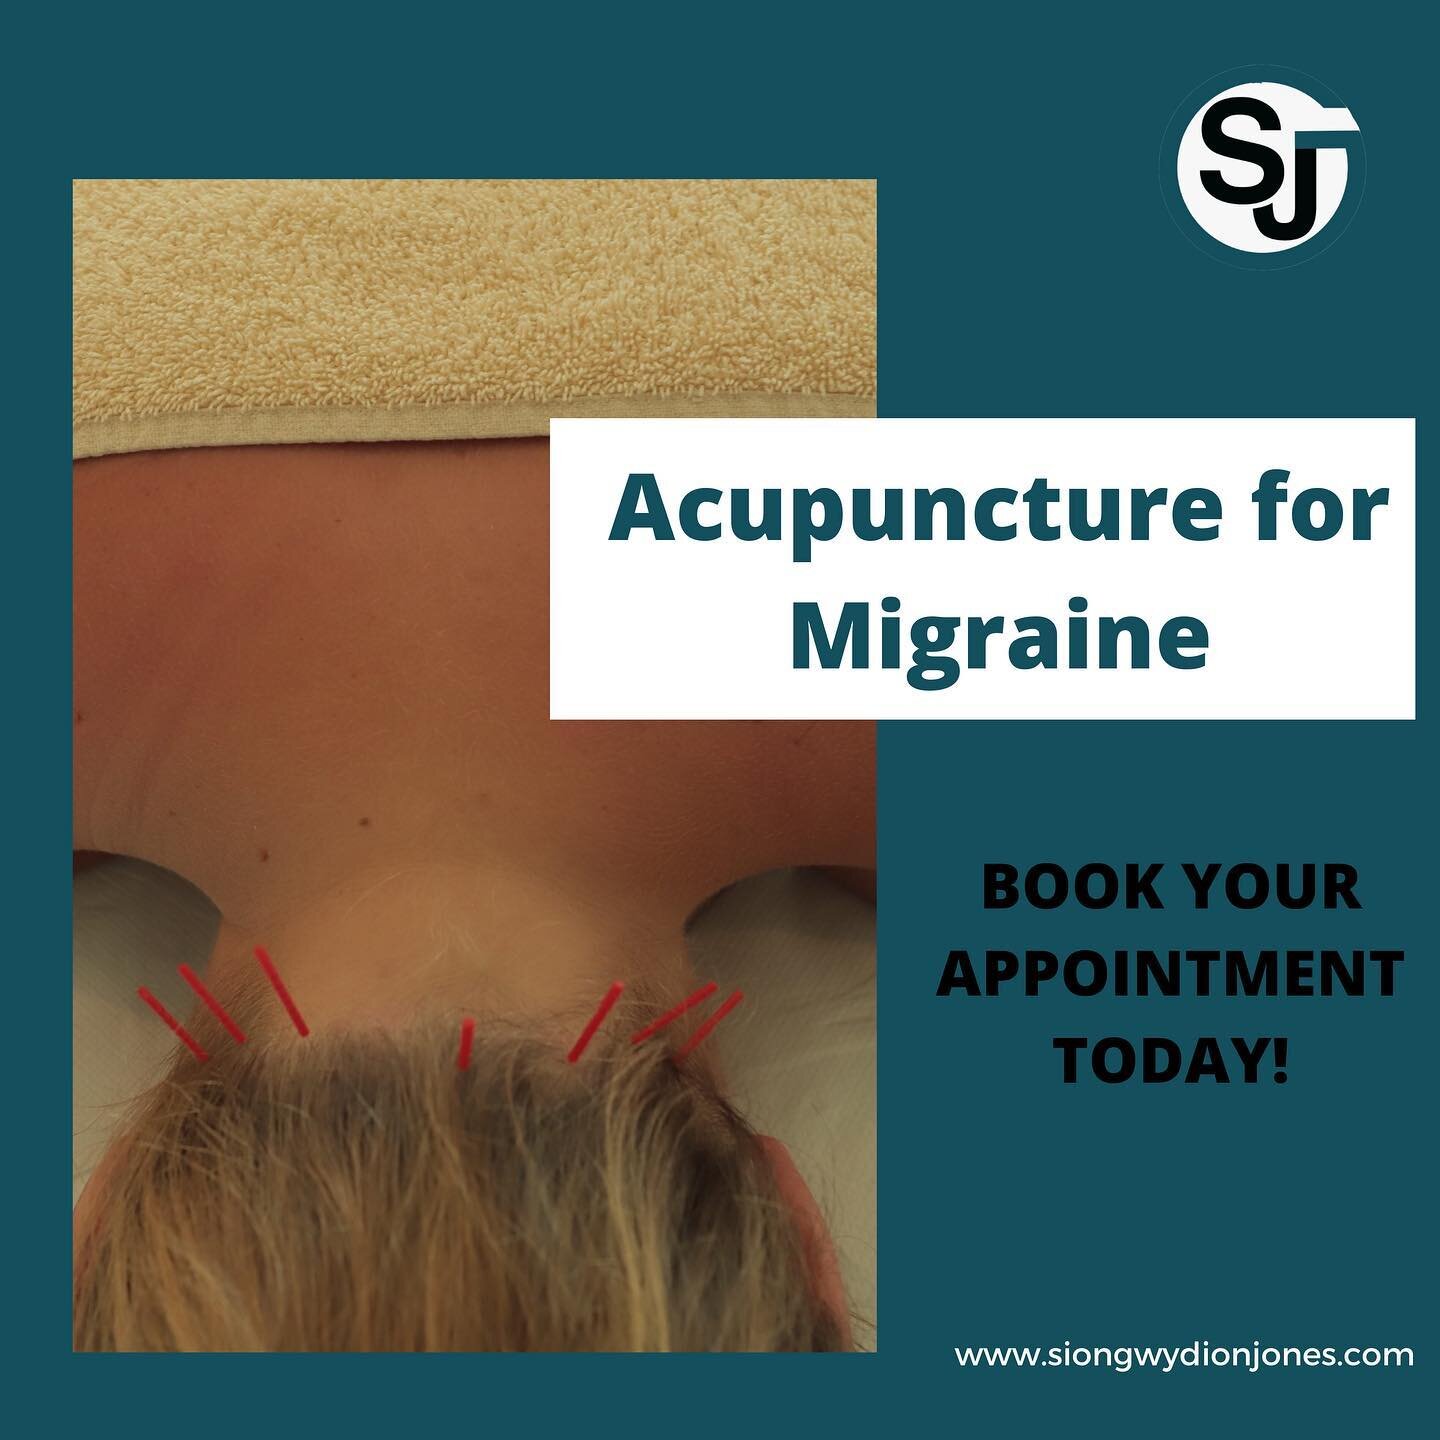 Treating the suboccipital muscle group and the upper traps to help with migraines. The cause could vary from whiplash for a car accident to just poor posture in front of the computer. Either way don&rsquo;t keep suffering, tap on the Bio link and boo